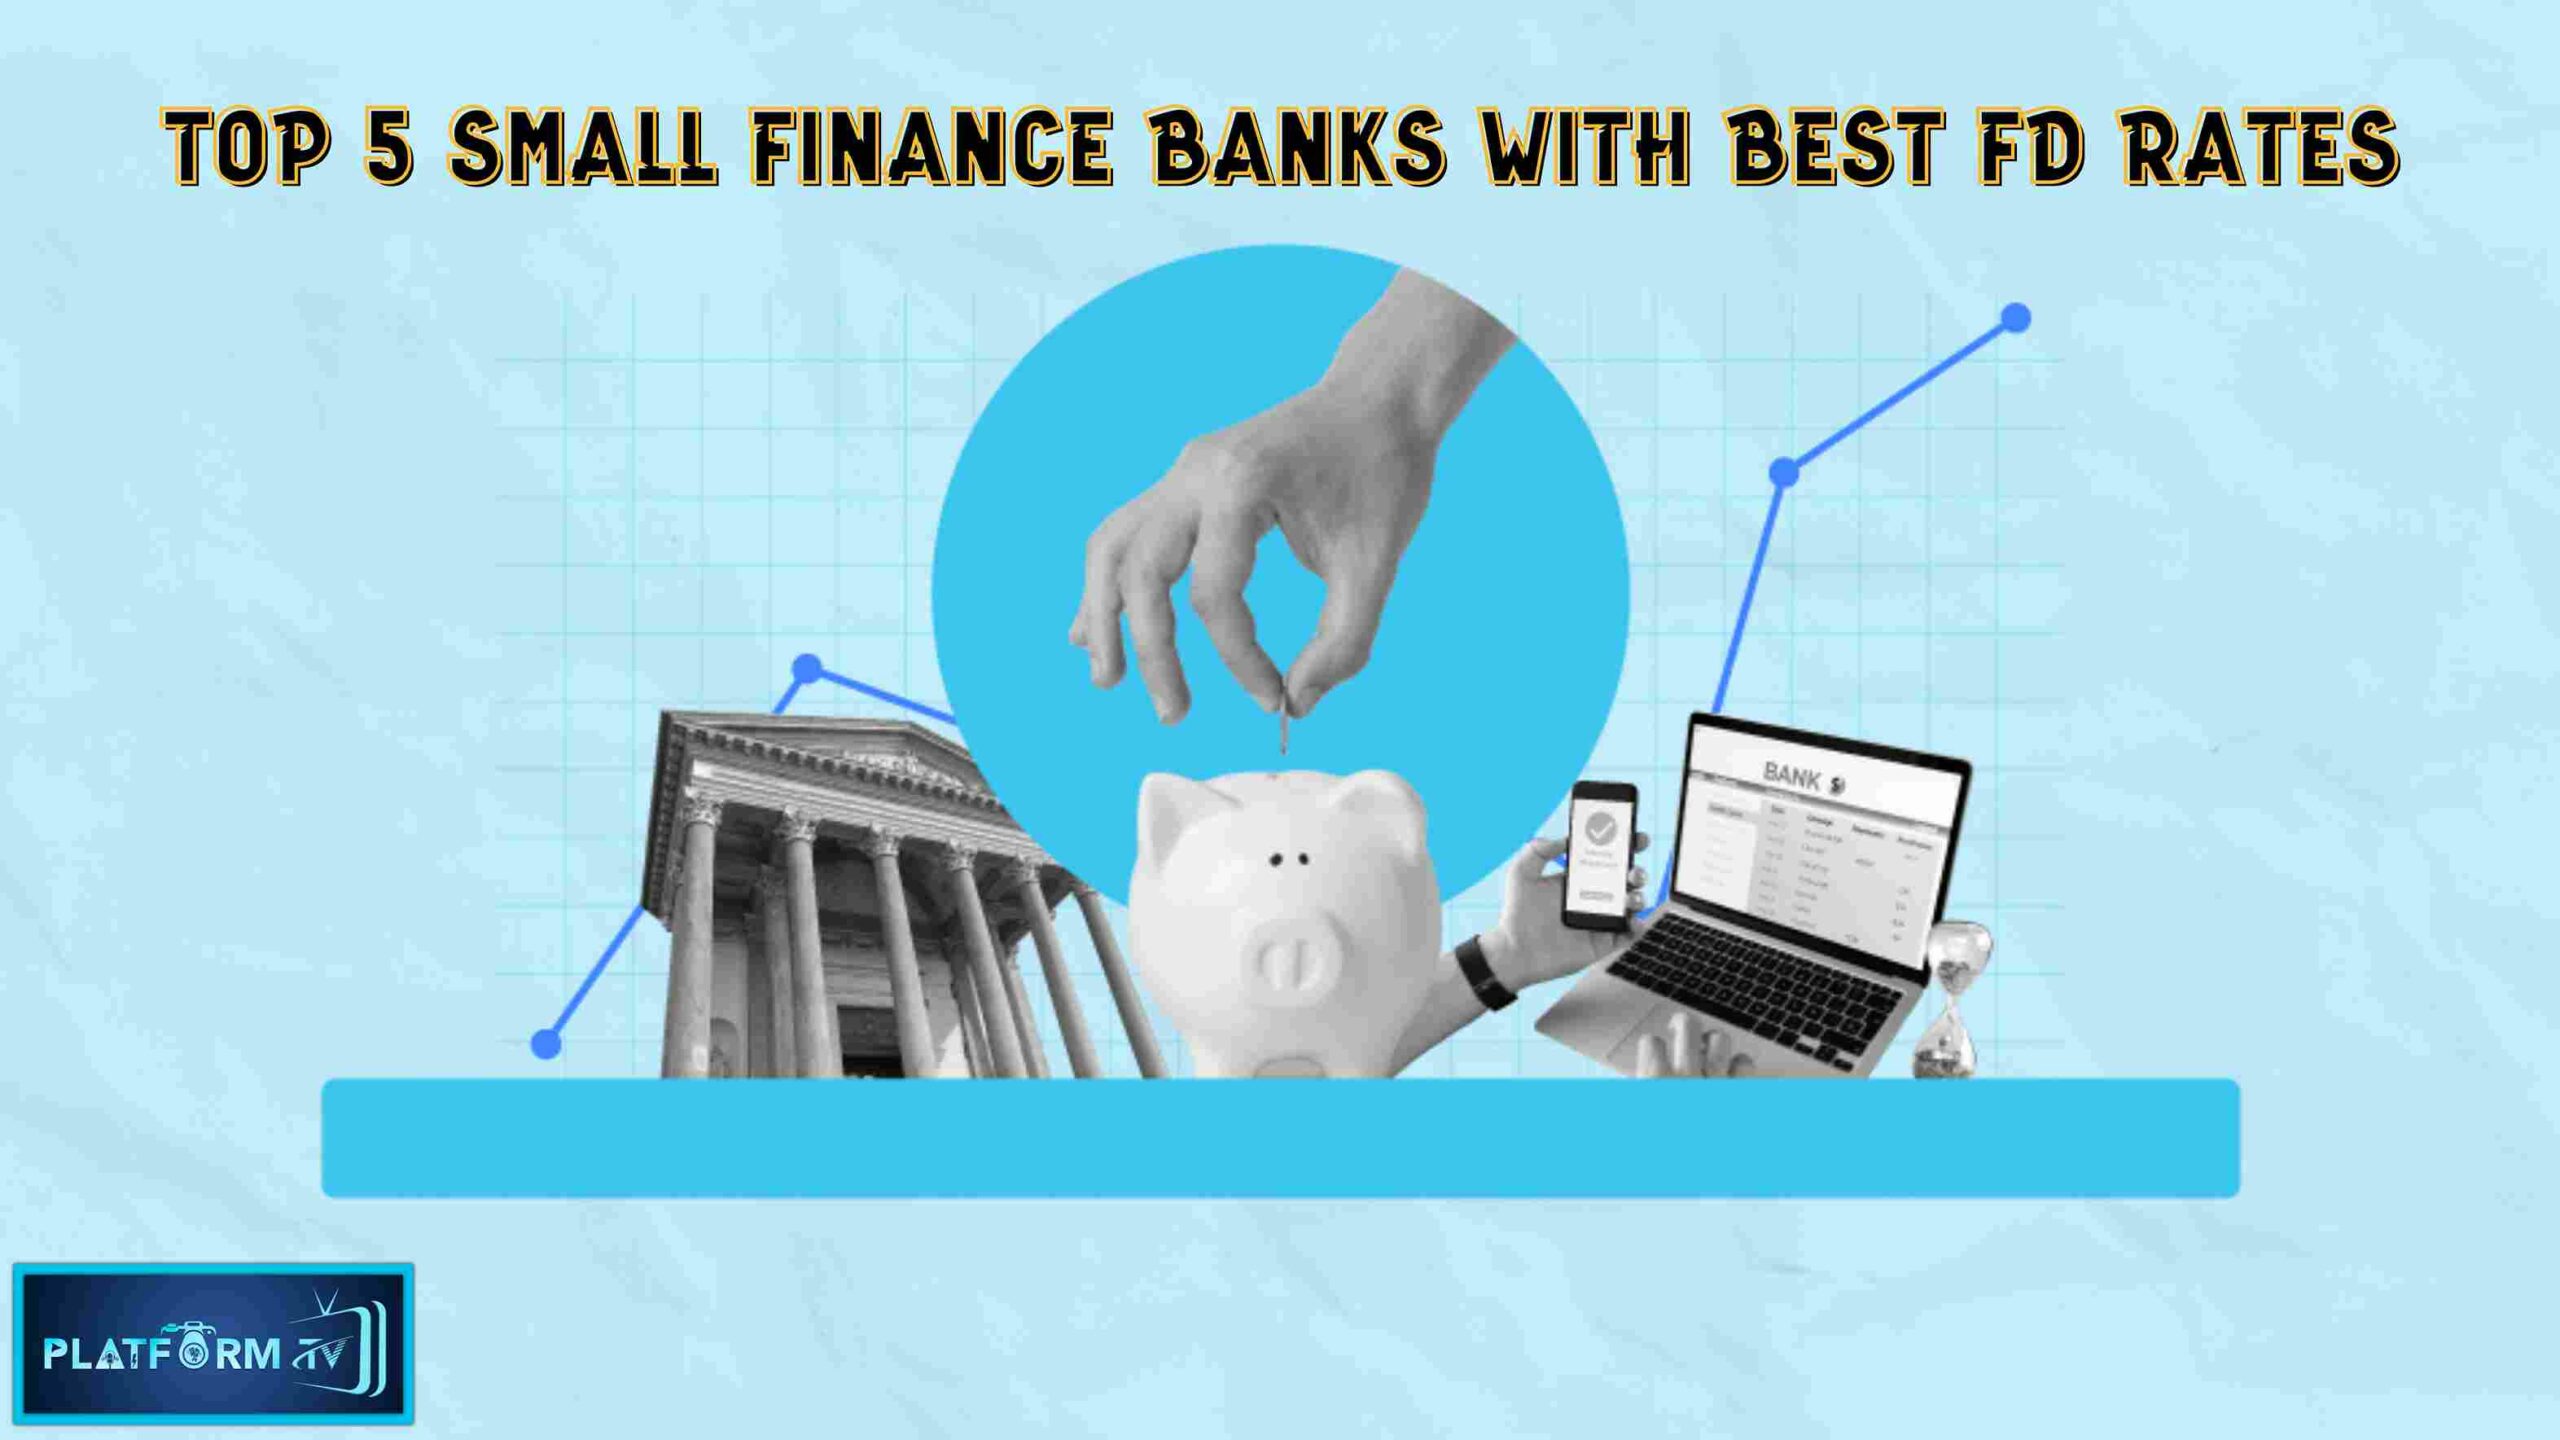 Top 5 Small Finance Banks With Best FD Rates - Platform Tamil